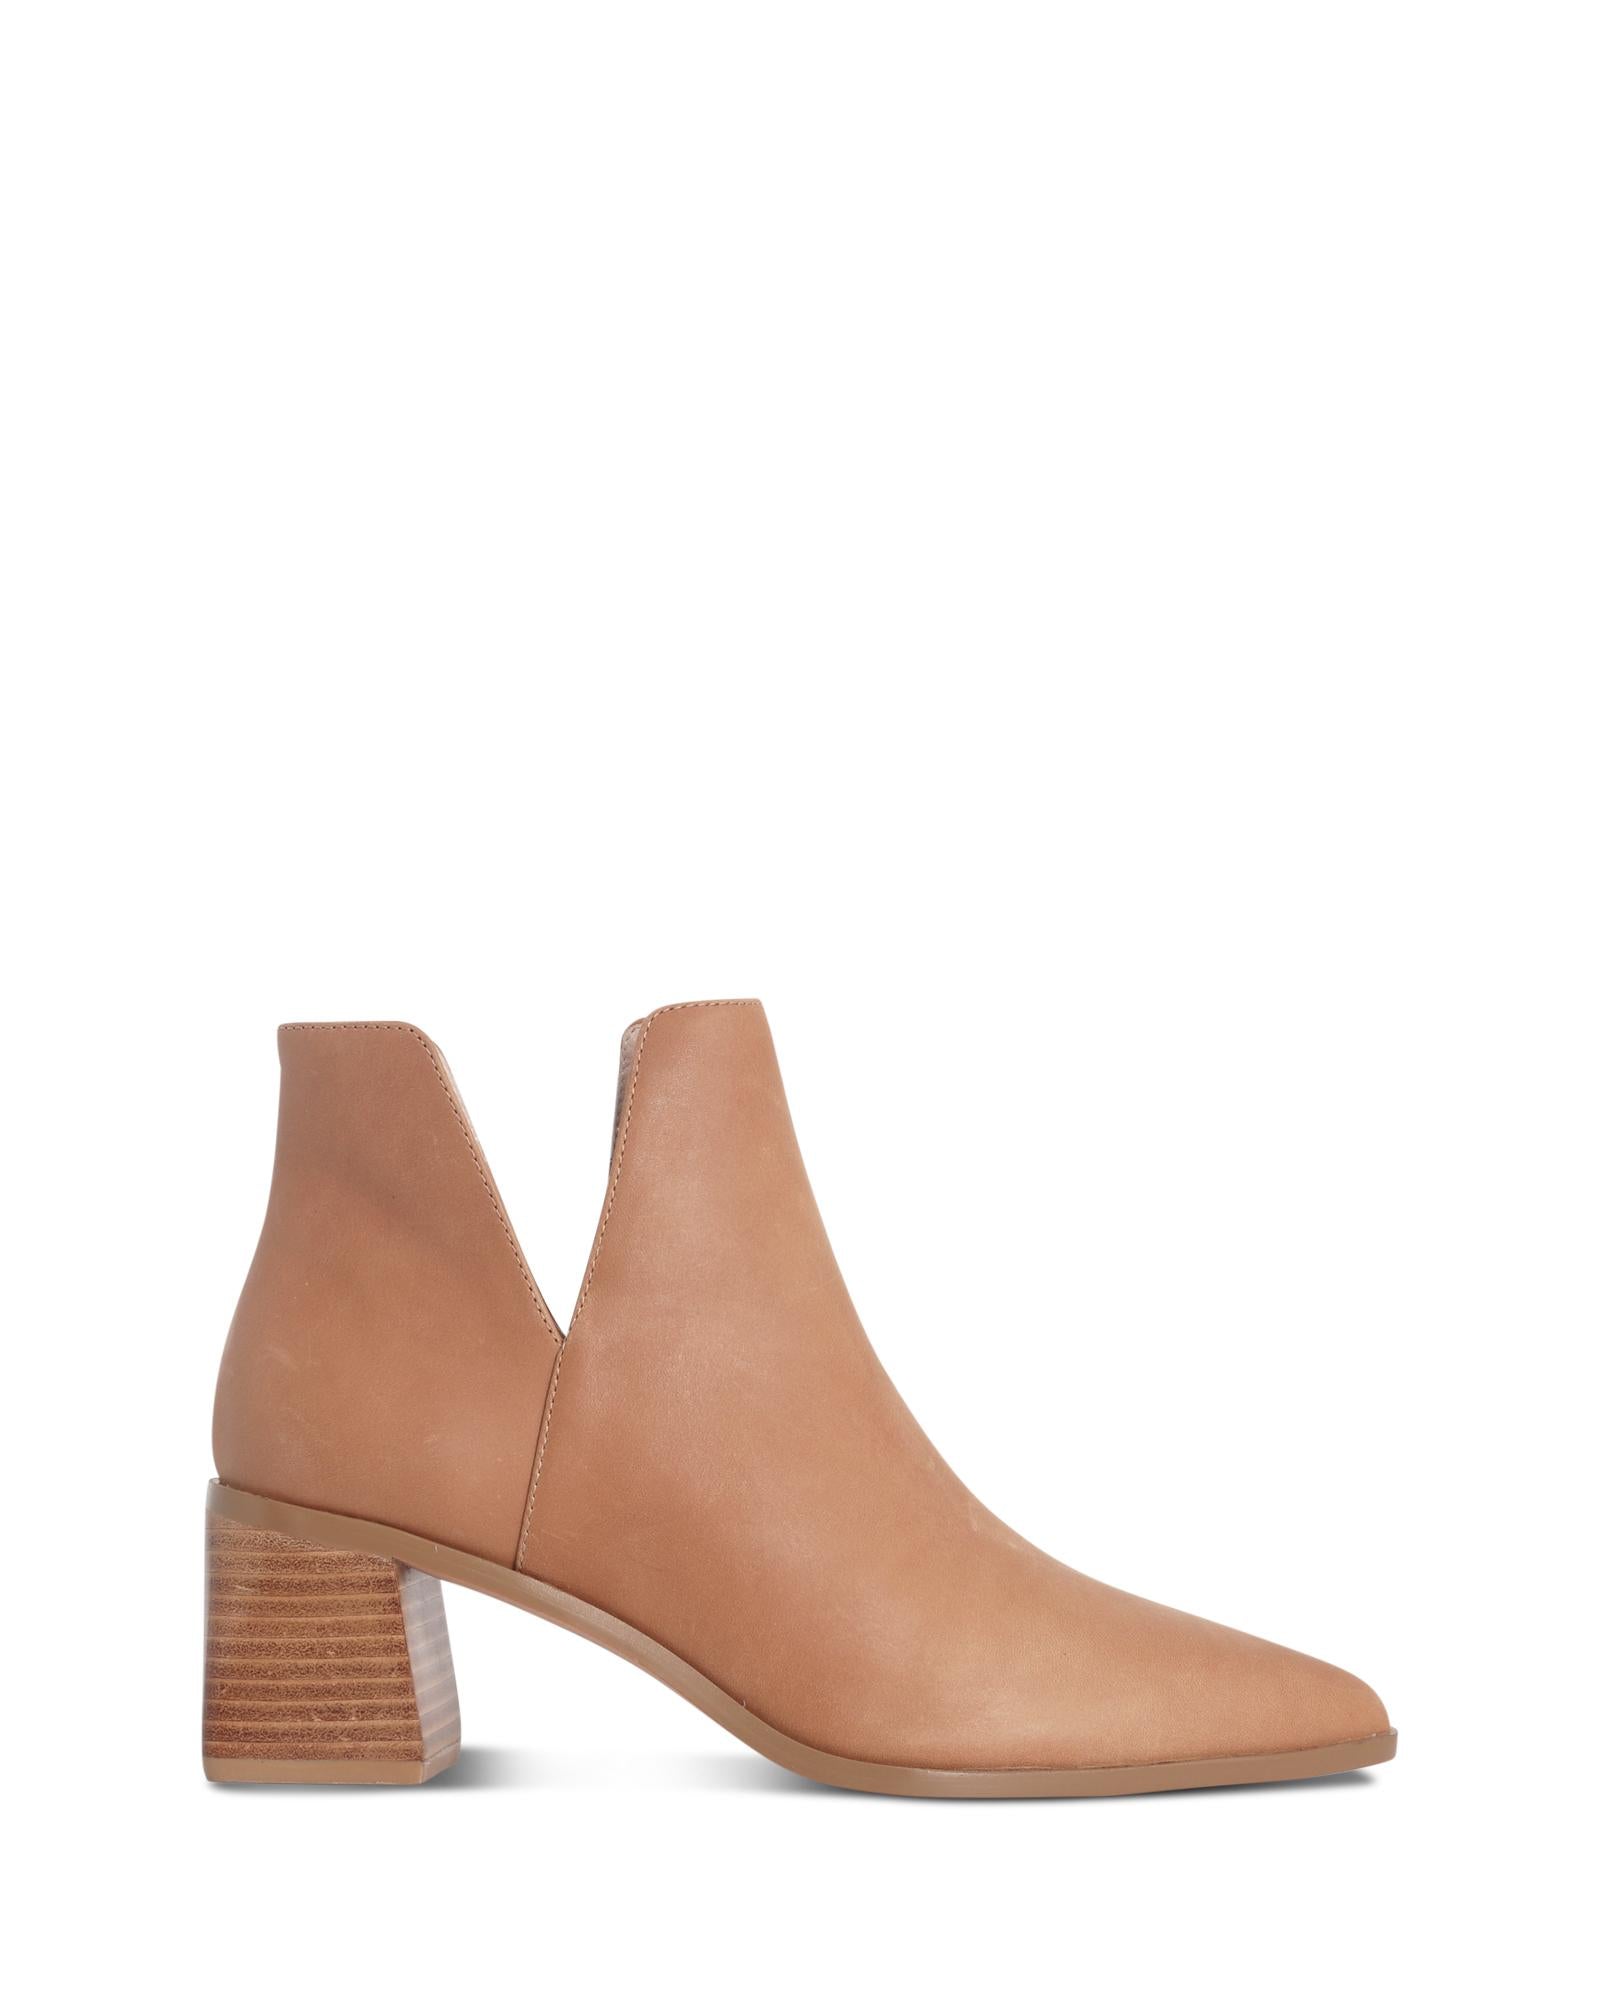 Payton Tan 8cm Block Heel Ankle Boot with Cut Out